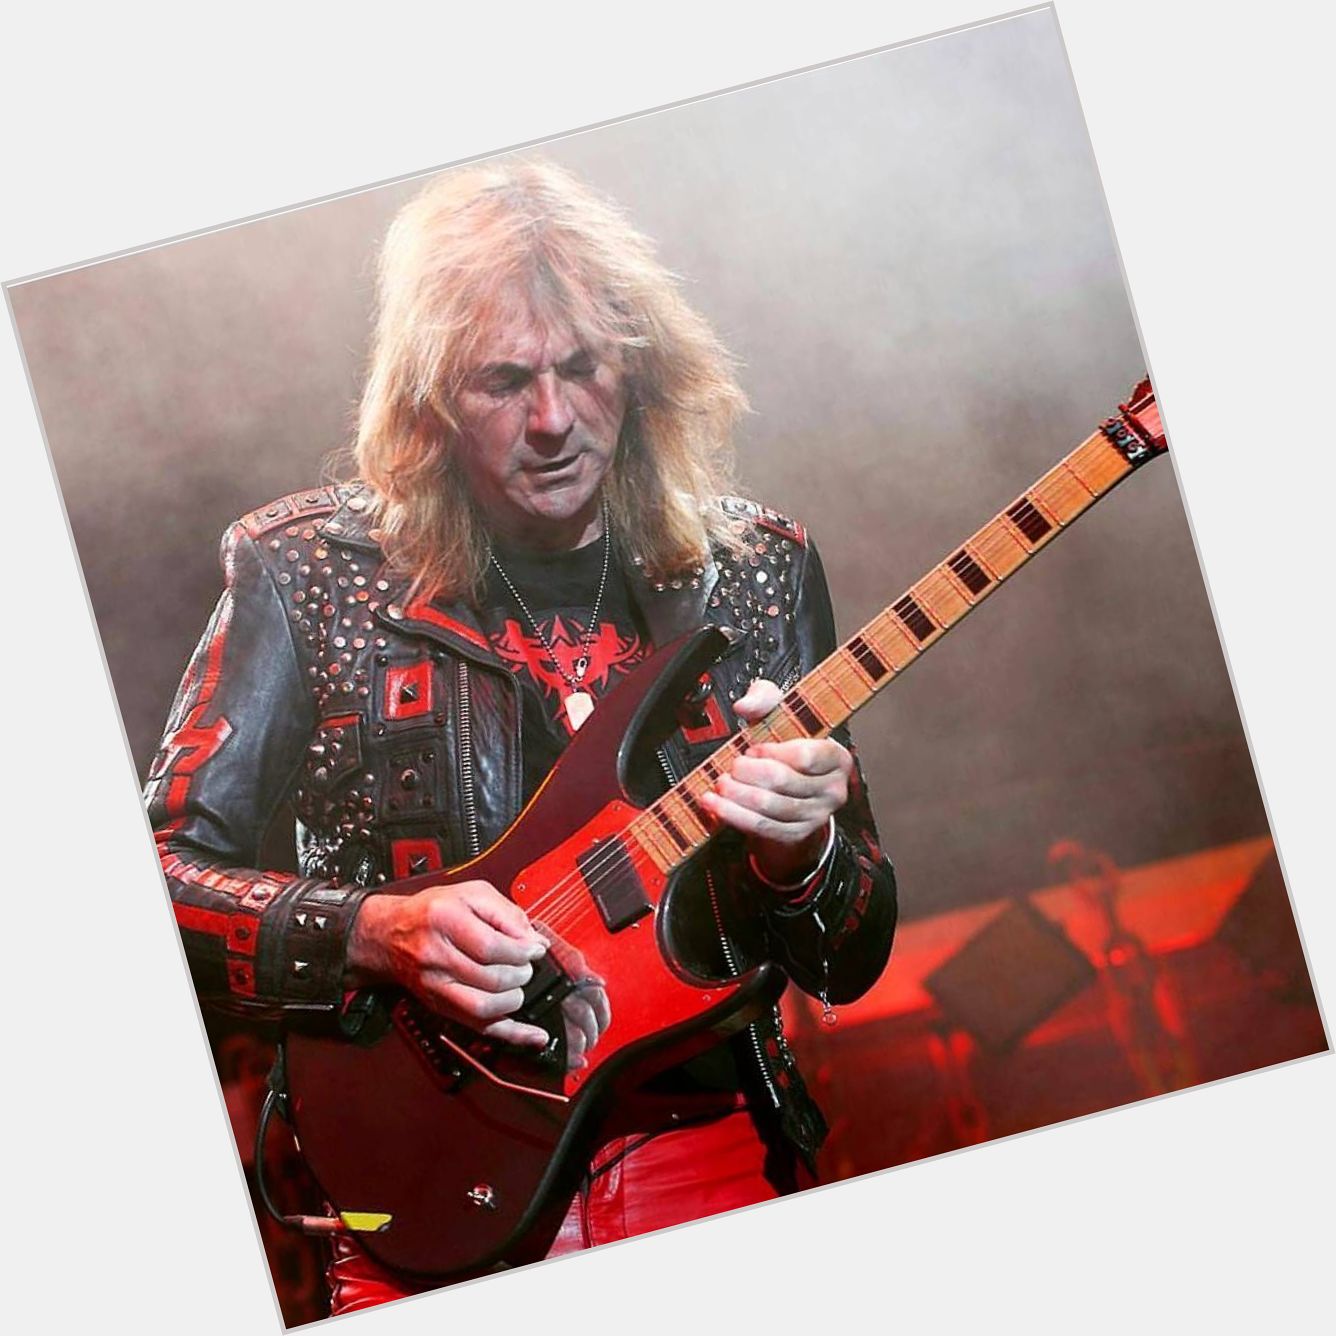 Happy Birthday on October 25th to Judas Priest guitarist and (co-) composer Glenn Tipton 